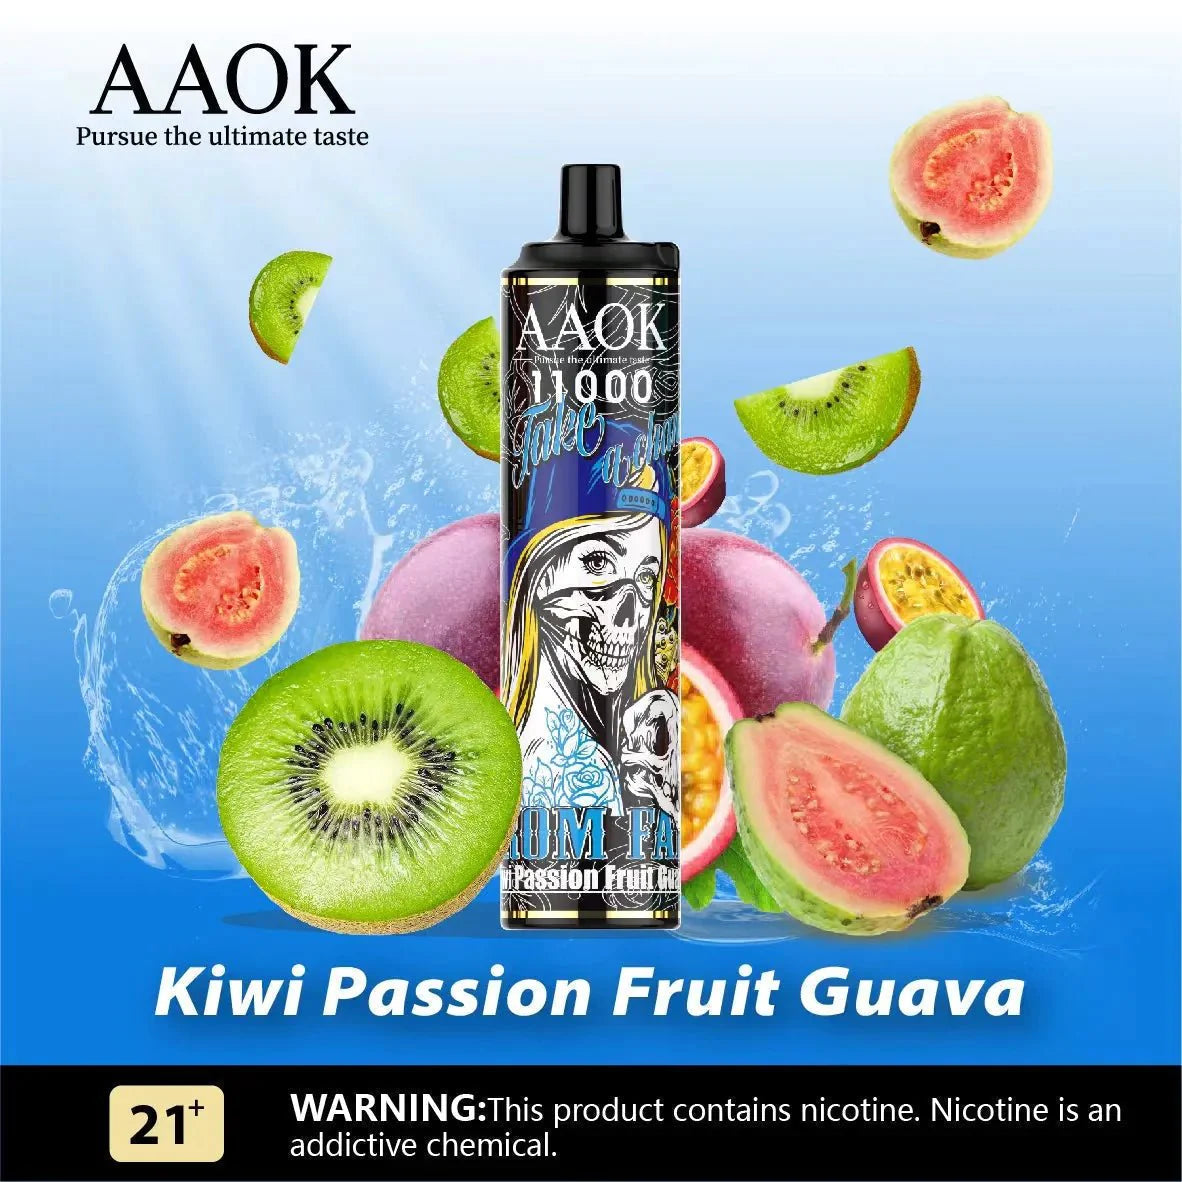 AAOK A83 11000 PUFFS - KIWI PASSION FRUIT GUAVA - HAPPYTRAIL